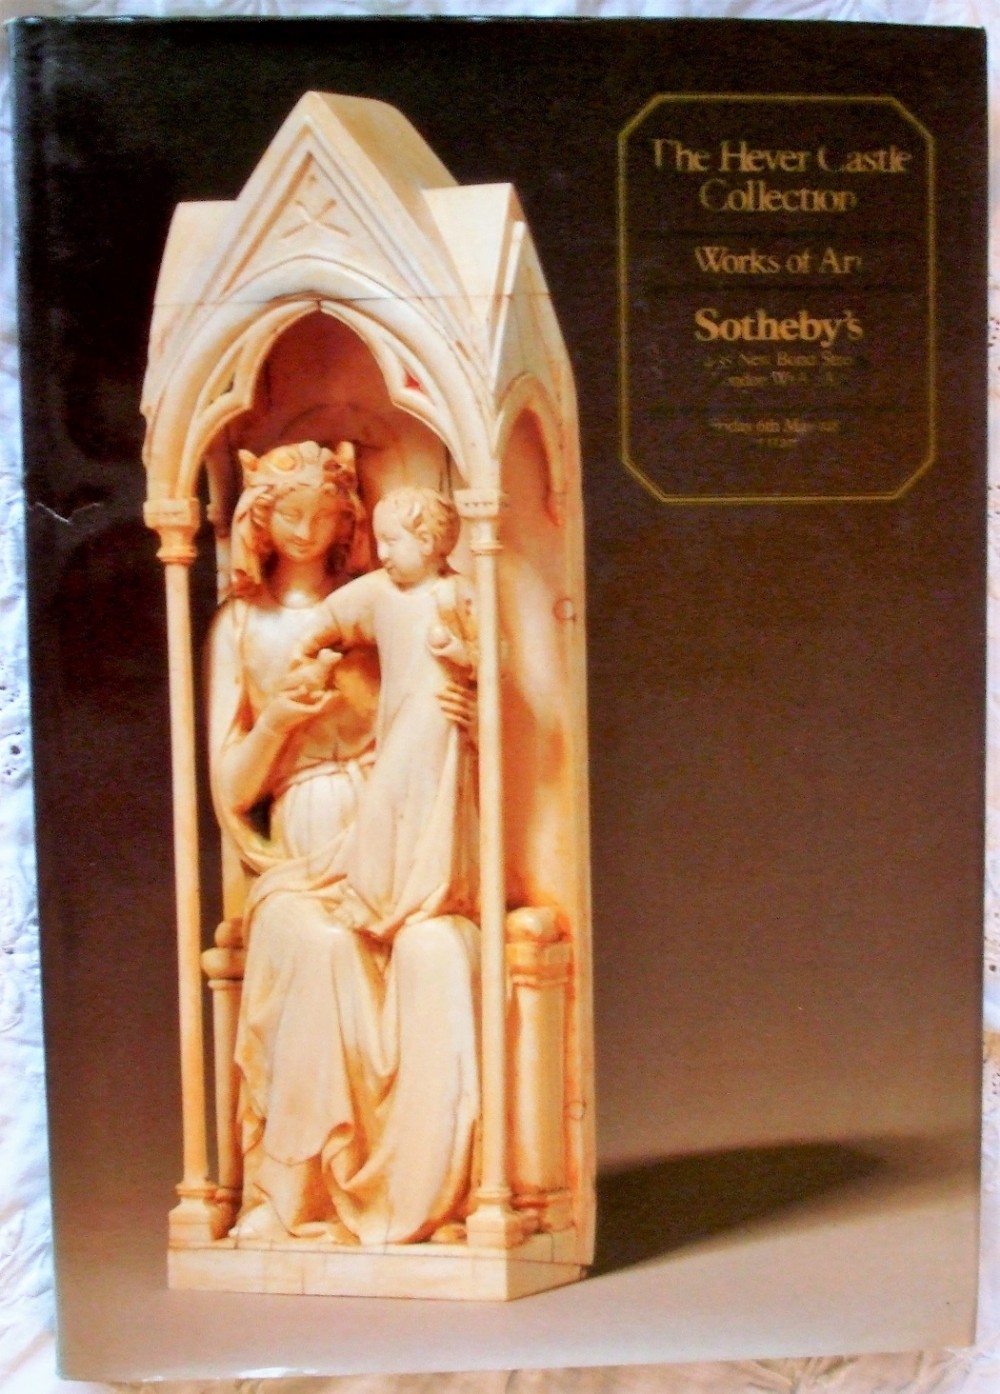 sotheby's the hever castle collection vol ii works of art london 06 05 1983